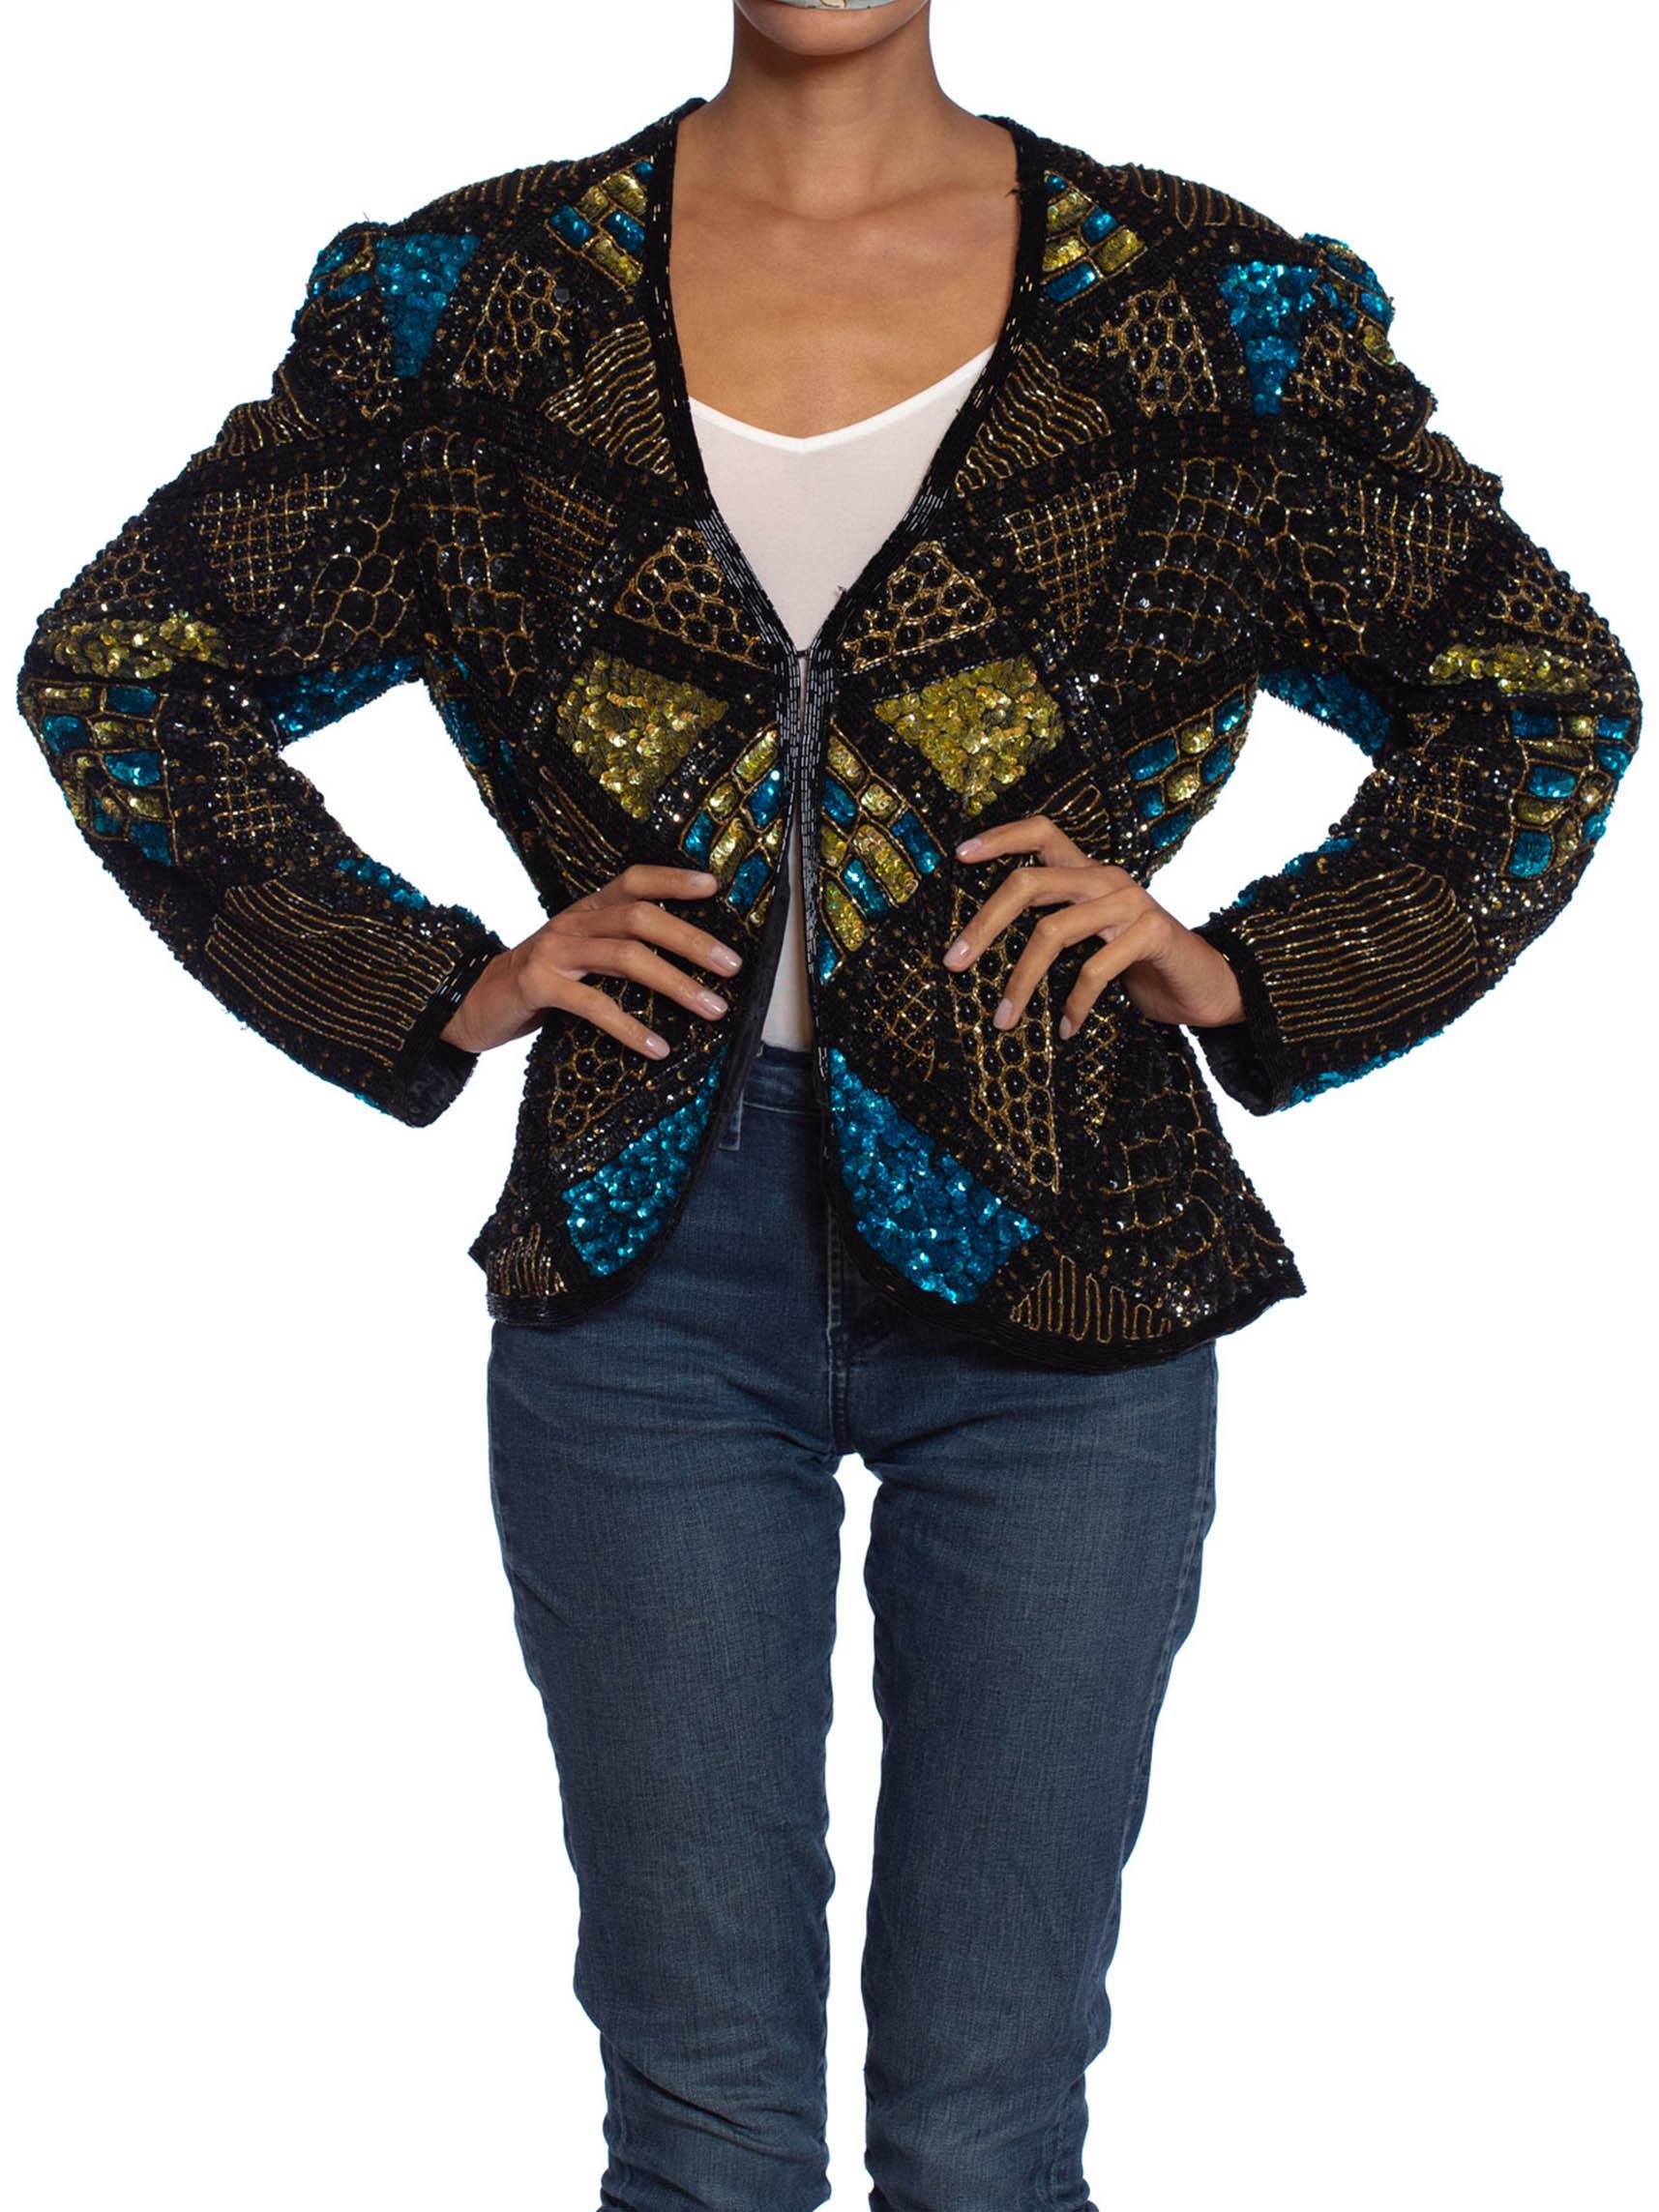 Women's 1980S Black & Gold Silk Beaded Jacket With Teal Sequin Highlights